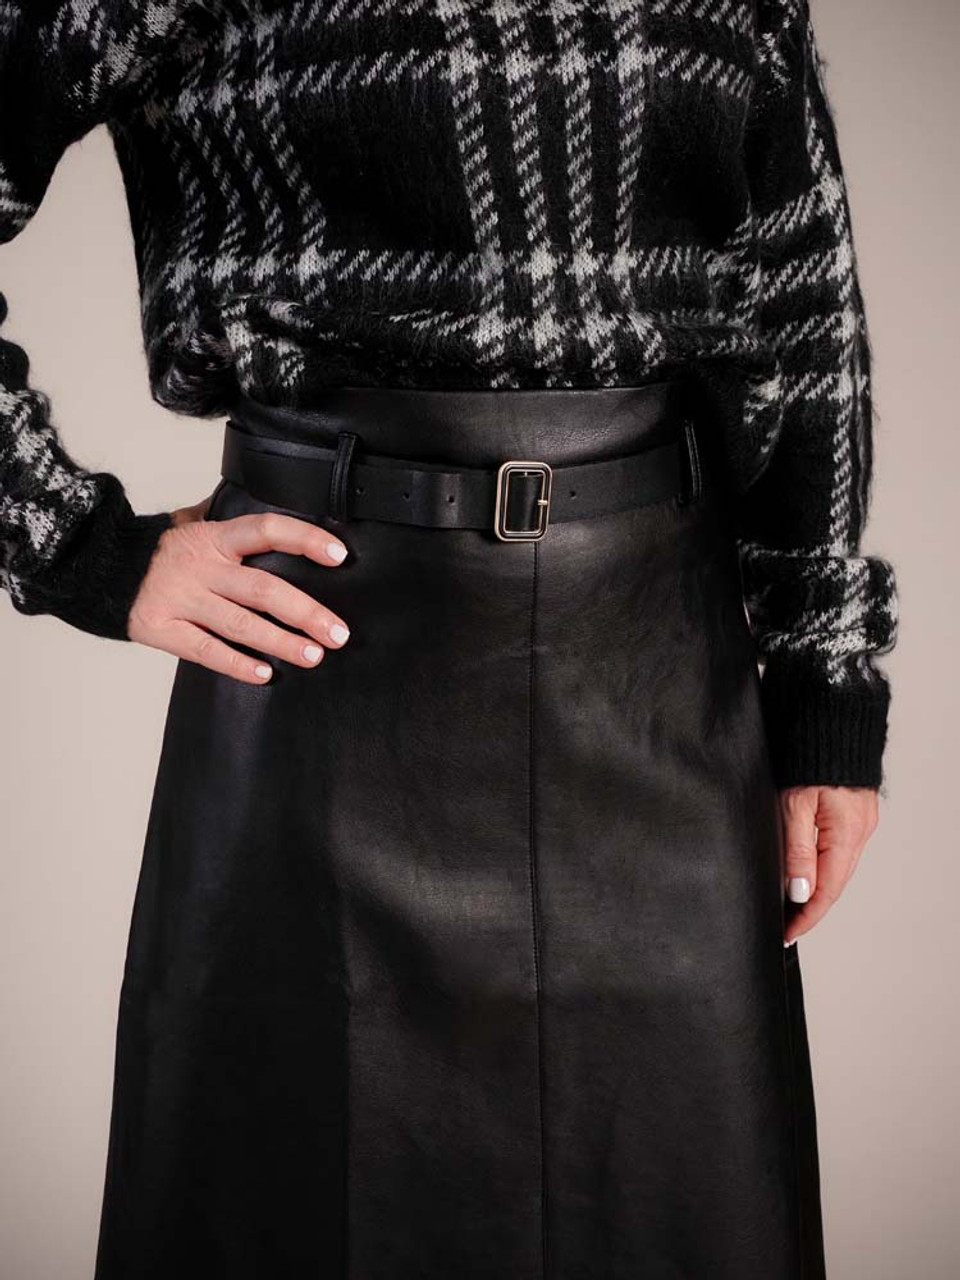 Buttery black faux leather high-waisted pencil skirt. Matching belt at waist with black and soft gold buckle, center seam at front with 9" split, 2 pleats and a center seam at back, 28" long, lined half way down from waist